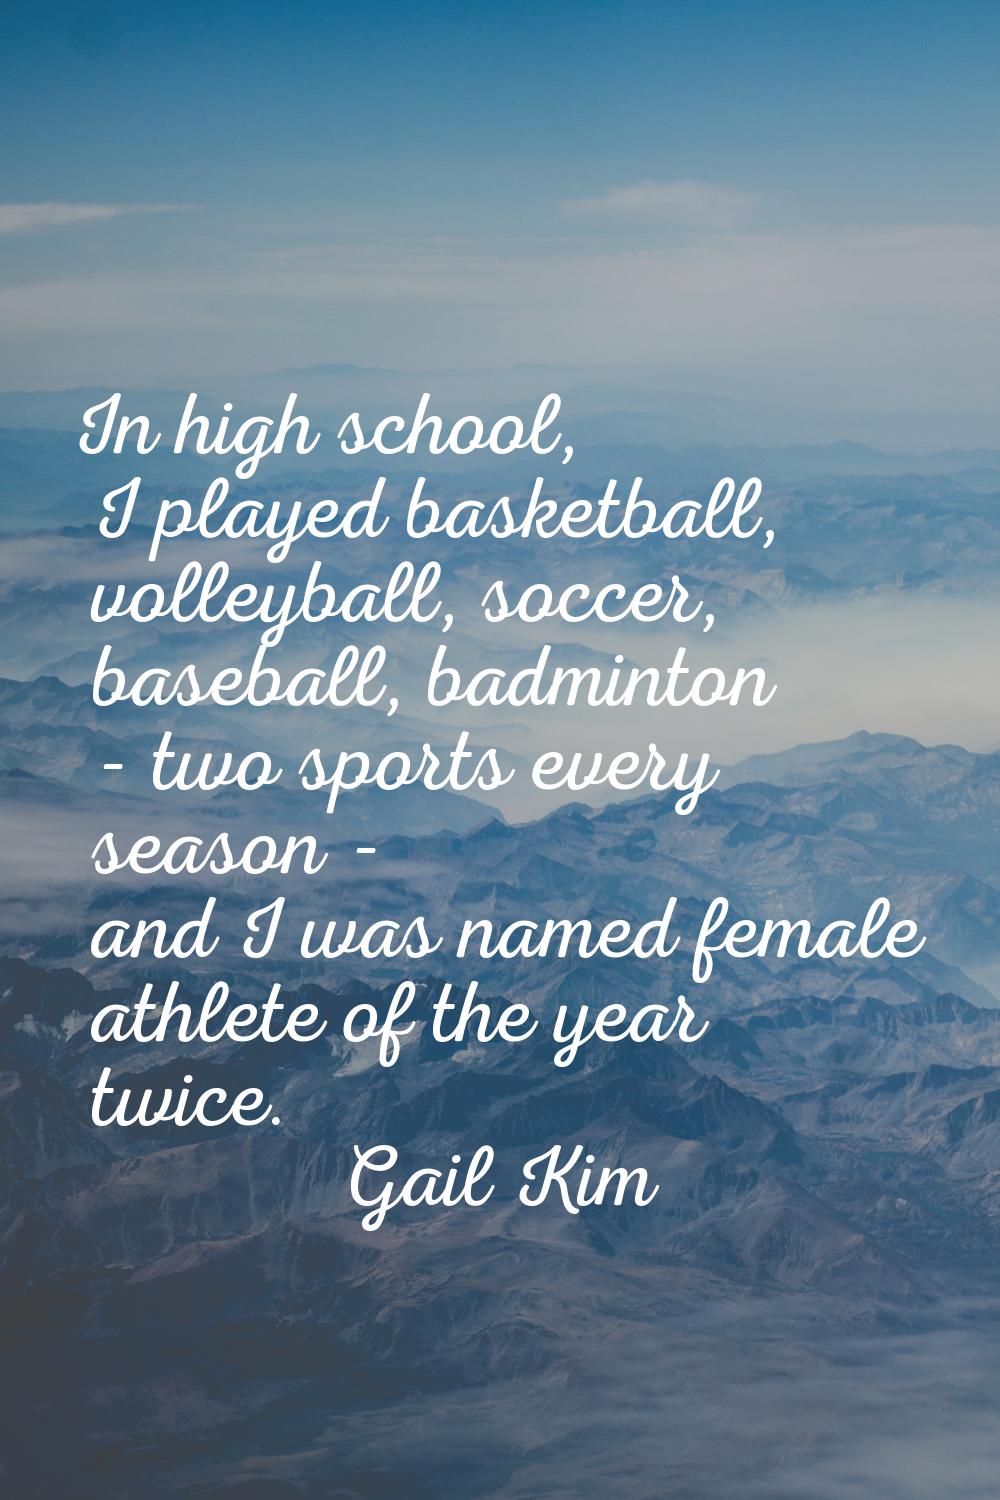 In high school, I played basketball, volleyball, soccer, baseball, badminton - two sports every sea